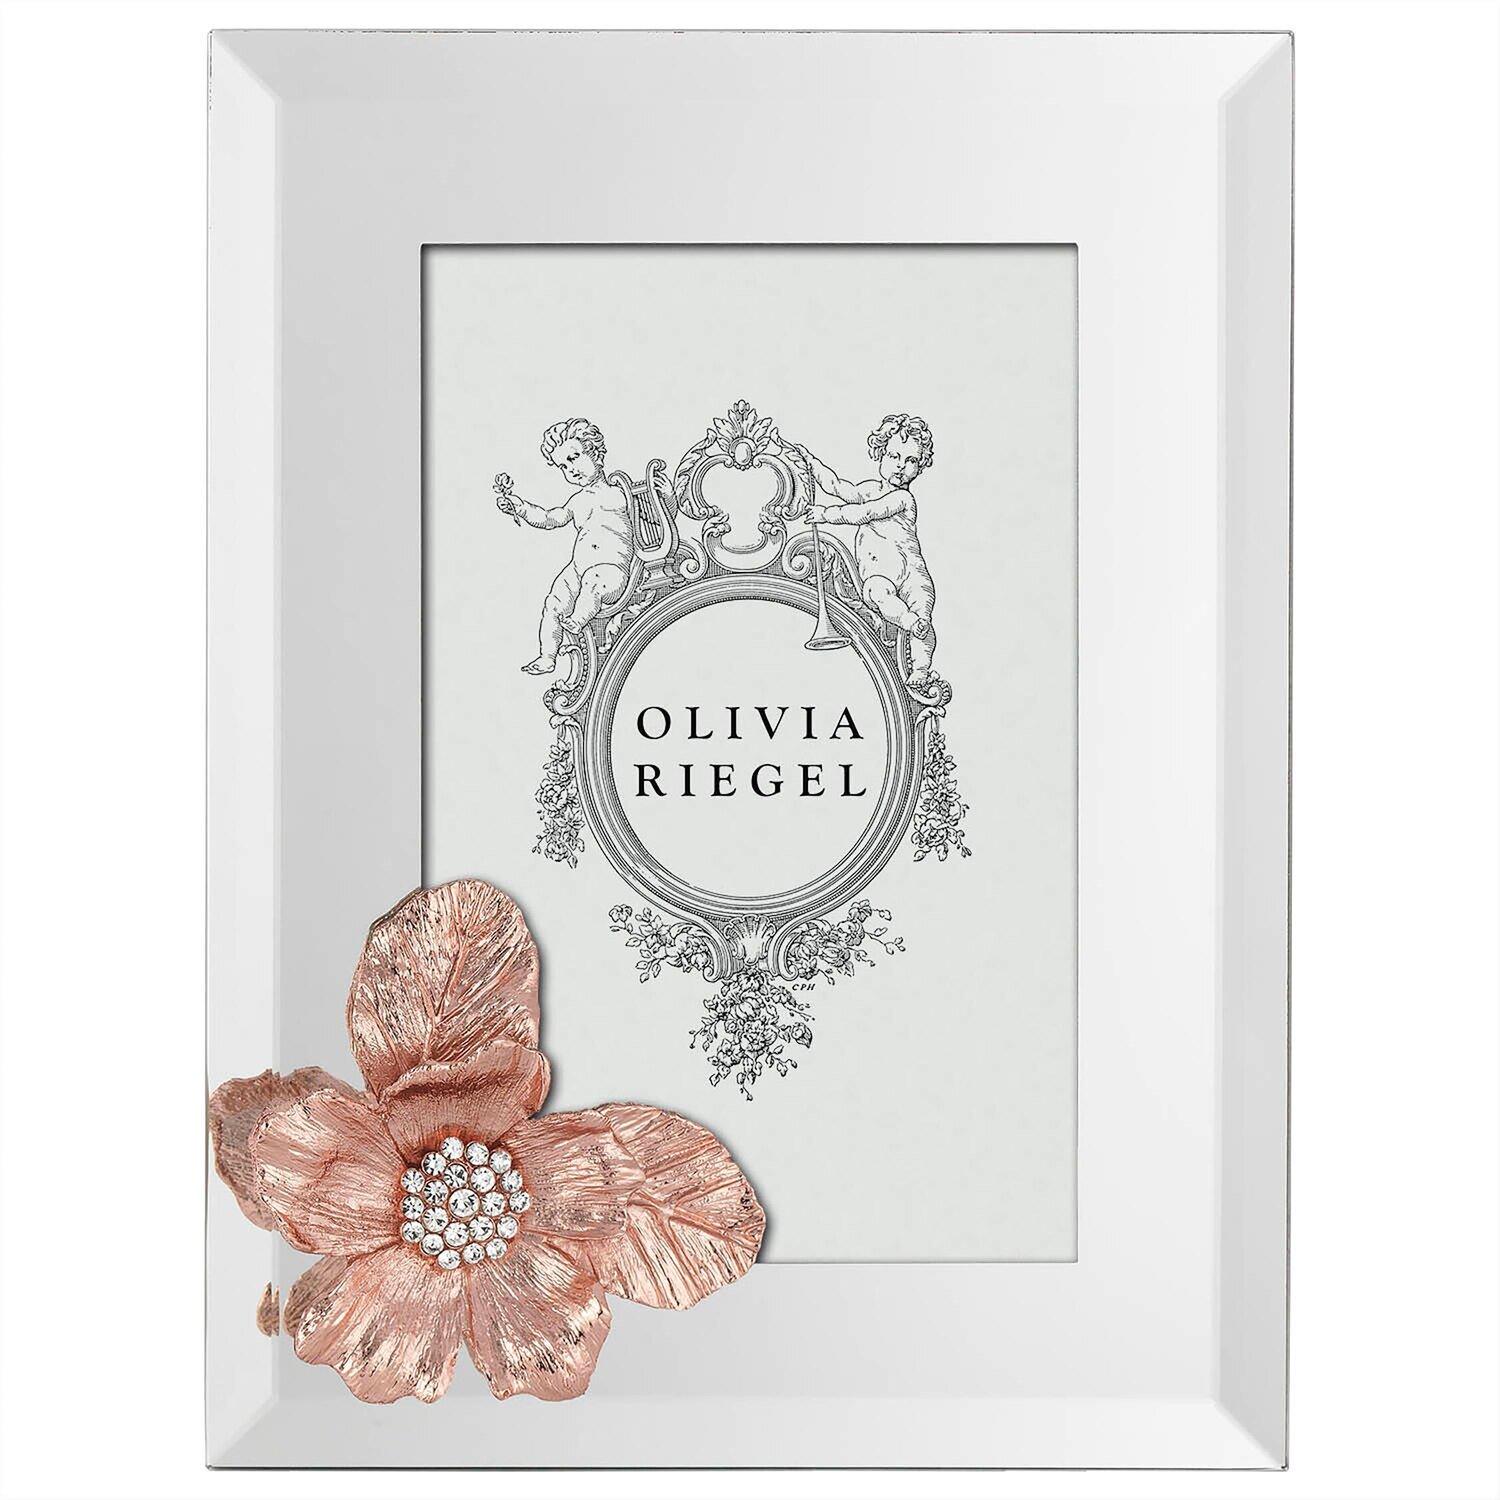 Olivia Riegel Rose Gold Botanica 4 x 6 Inch Picture Frame RT4214